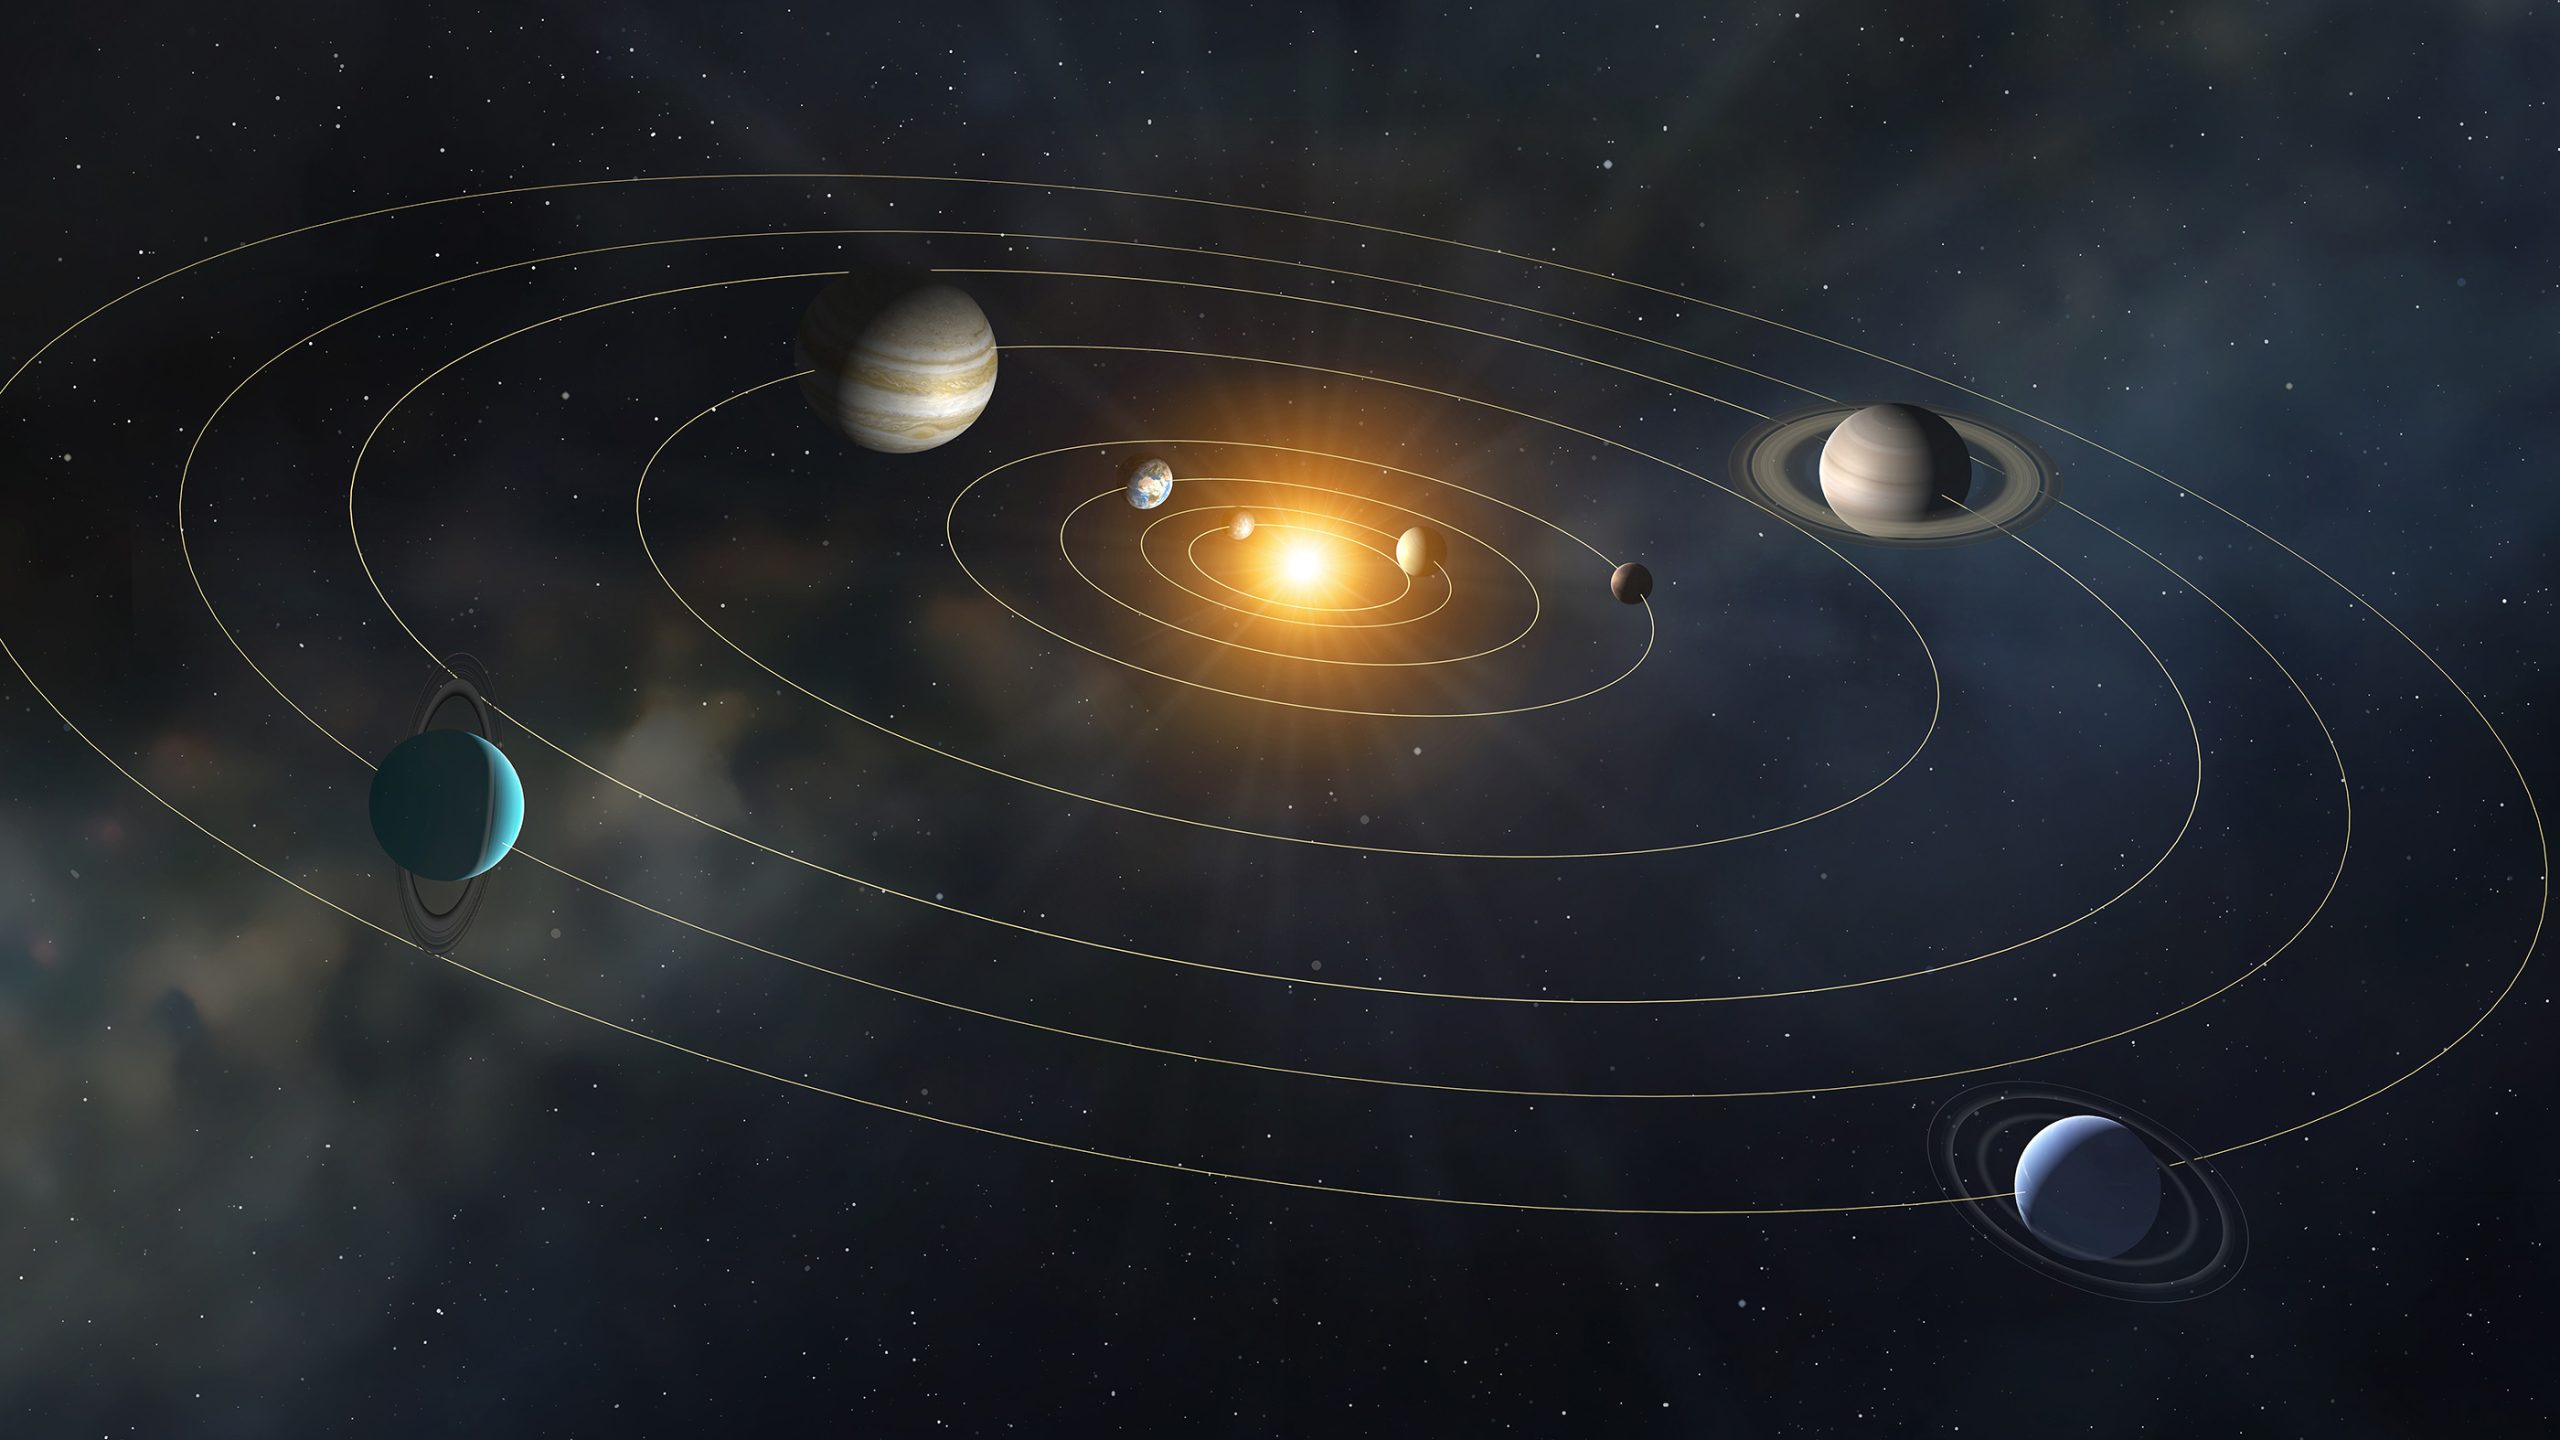 24 interesting facts about the Solar System